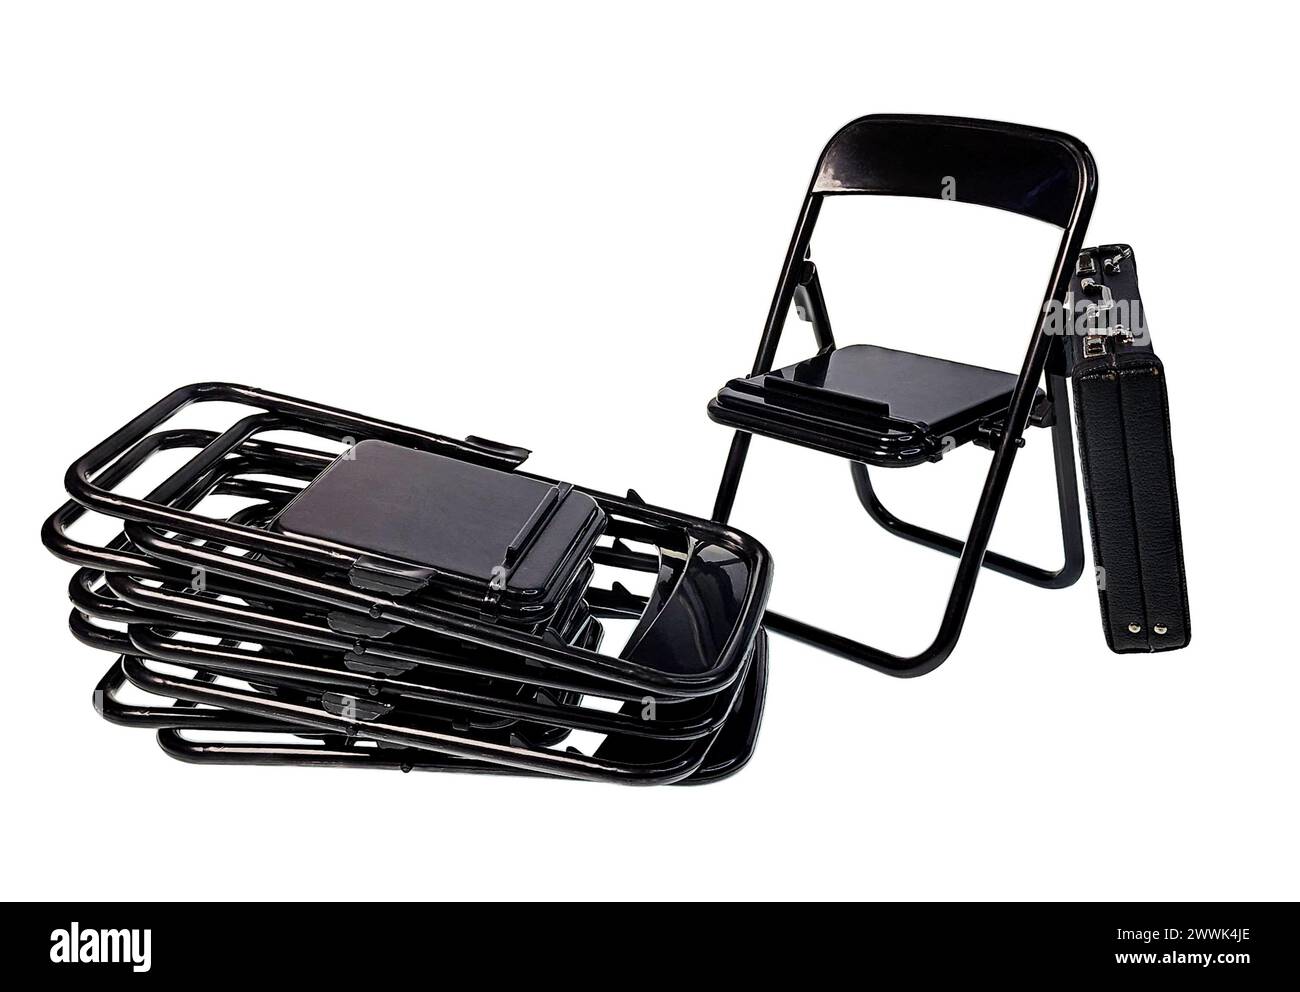 A set of Black Folding chairs for easy seating for groups and briefcase Stock Photo